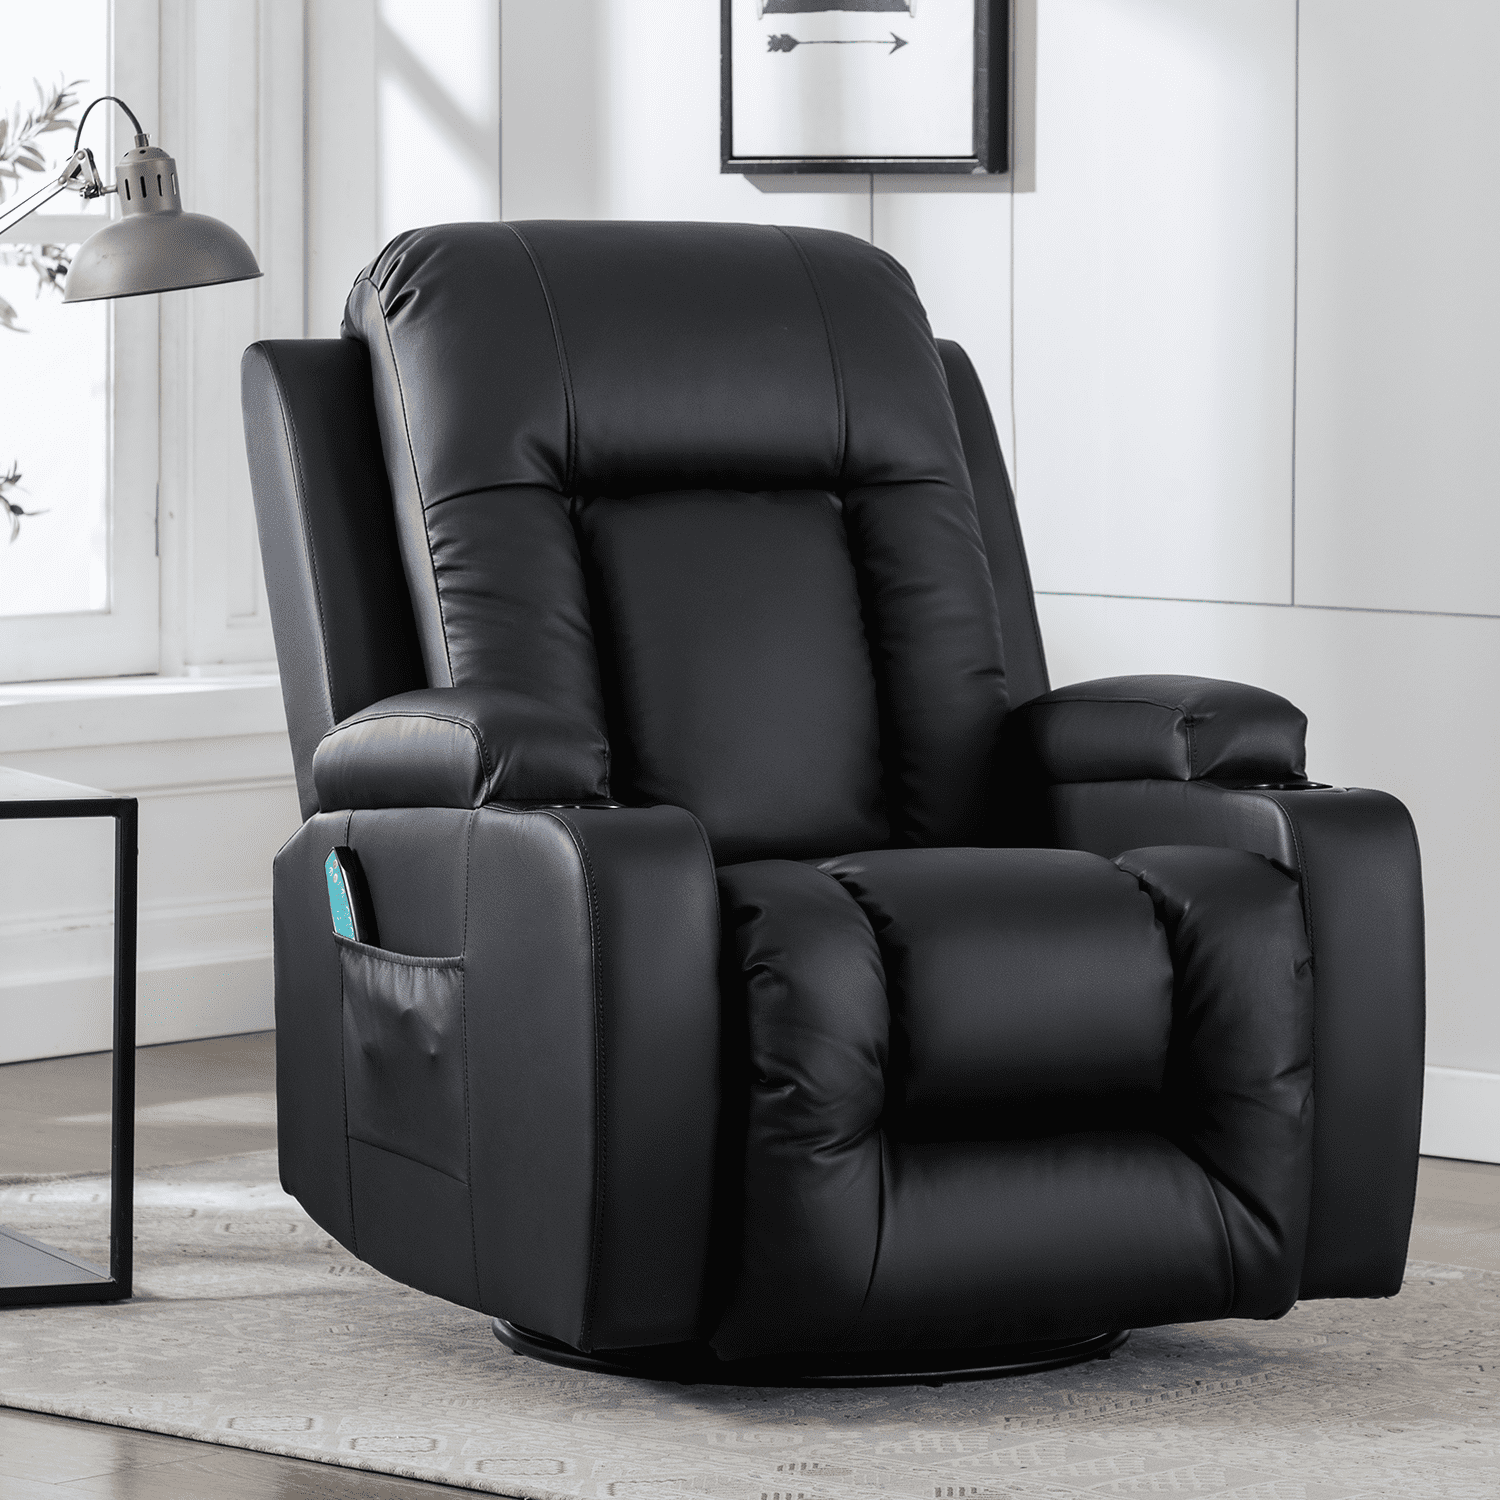 Swivel Leather Reclining Sofa, Black Leather Rocking Recliner Chair